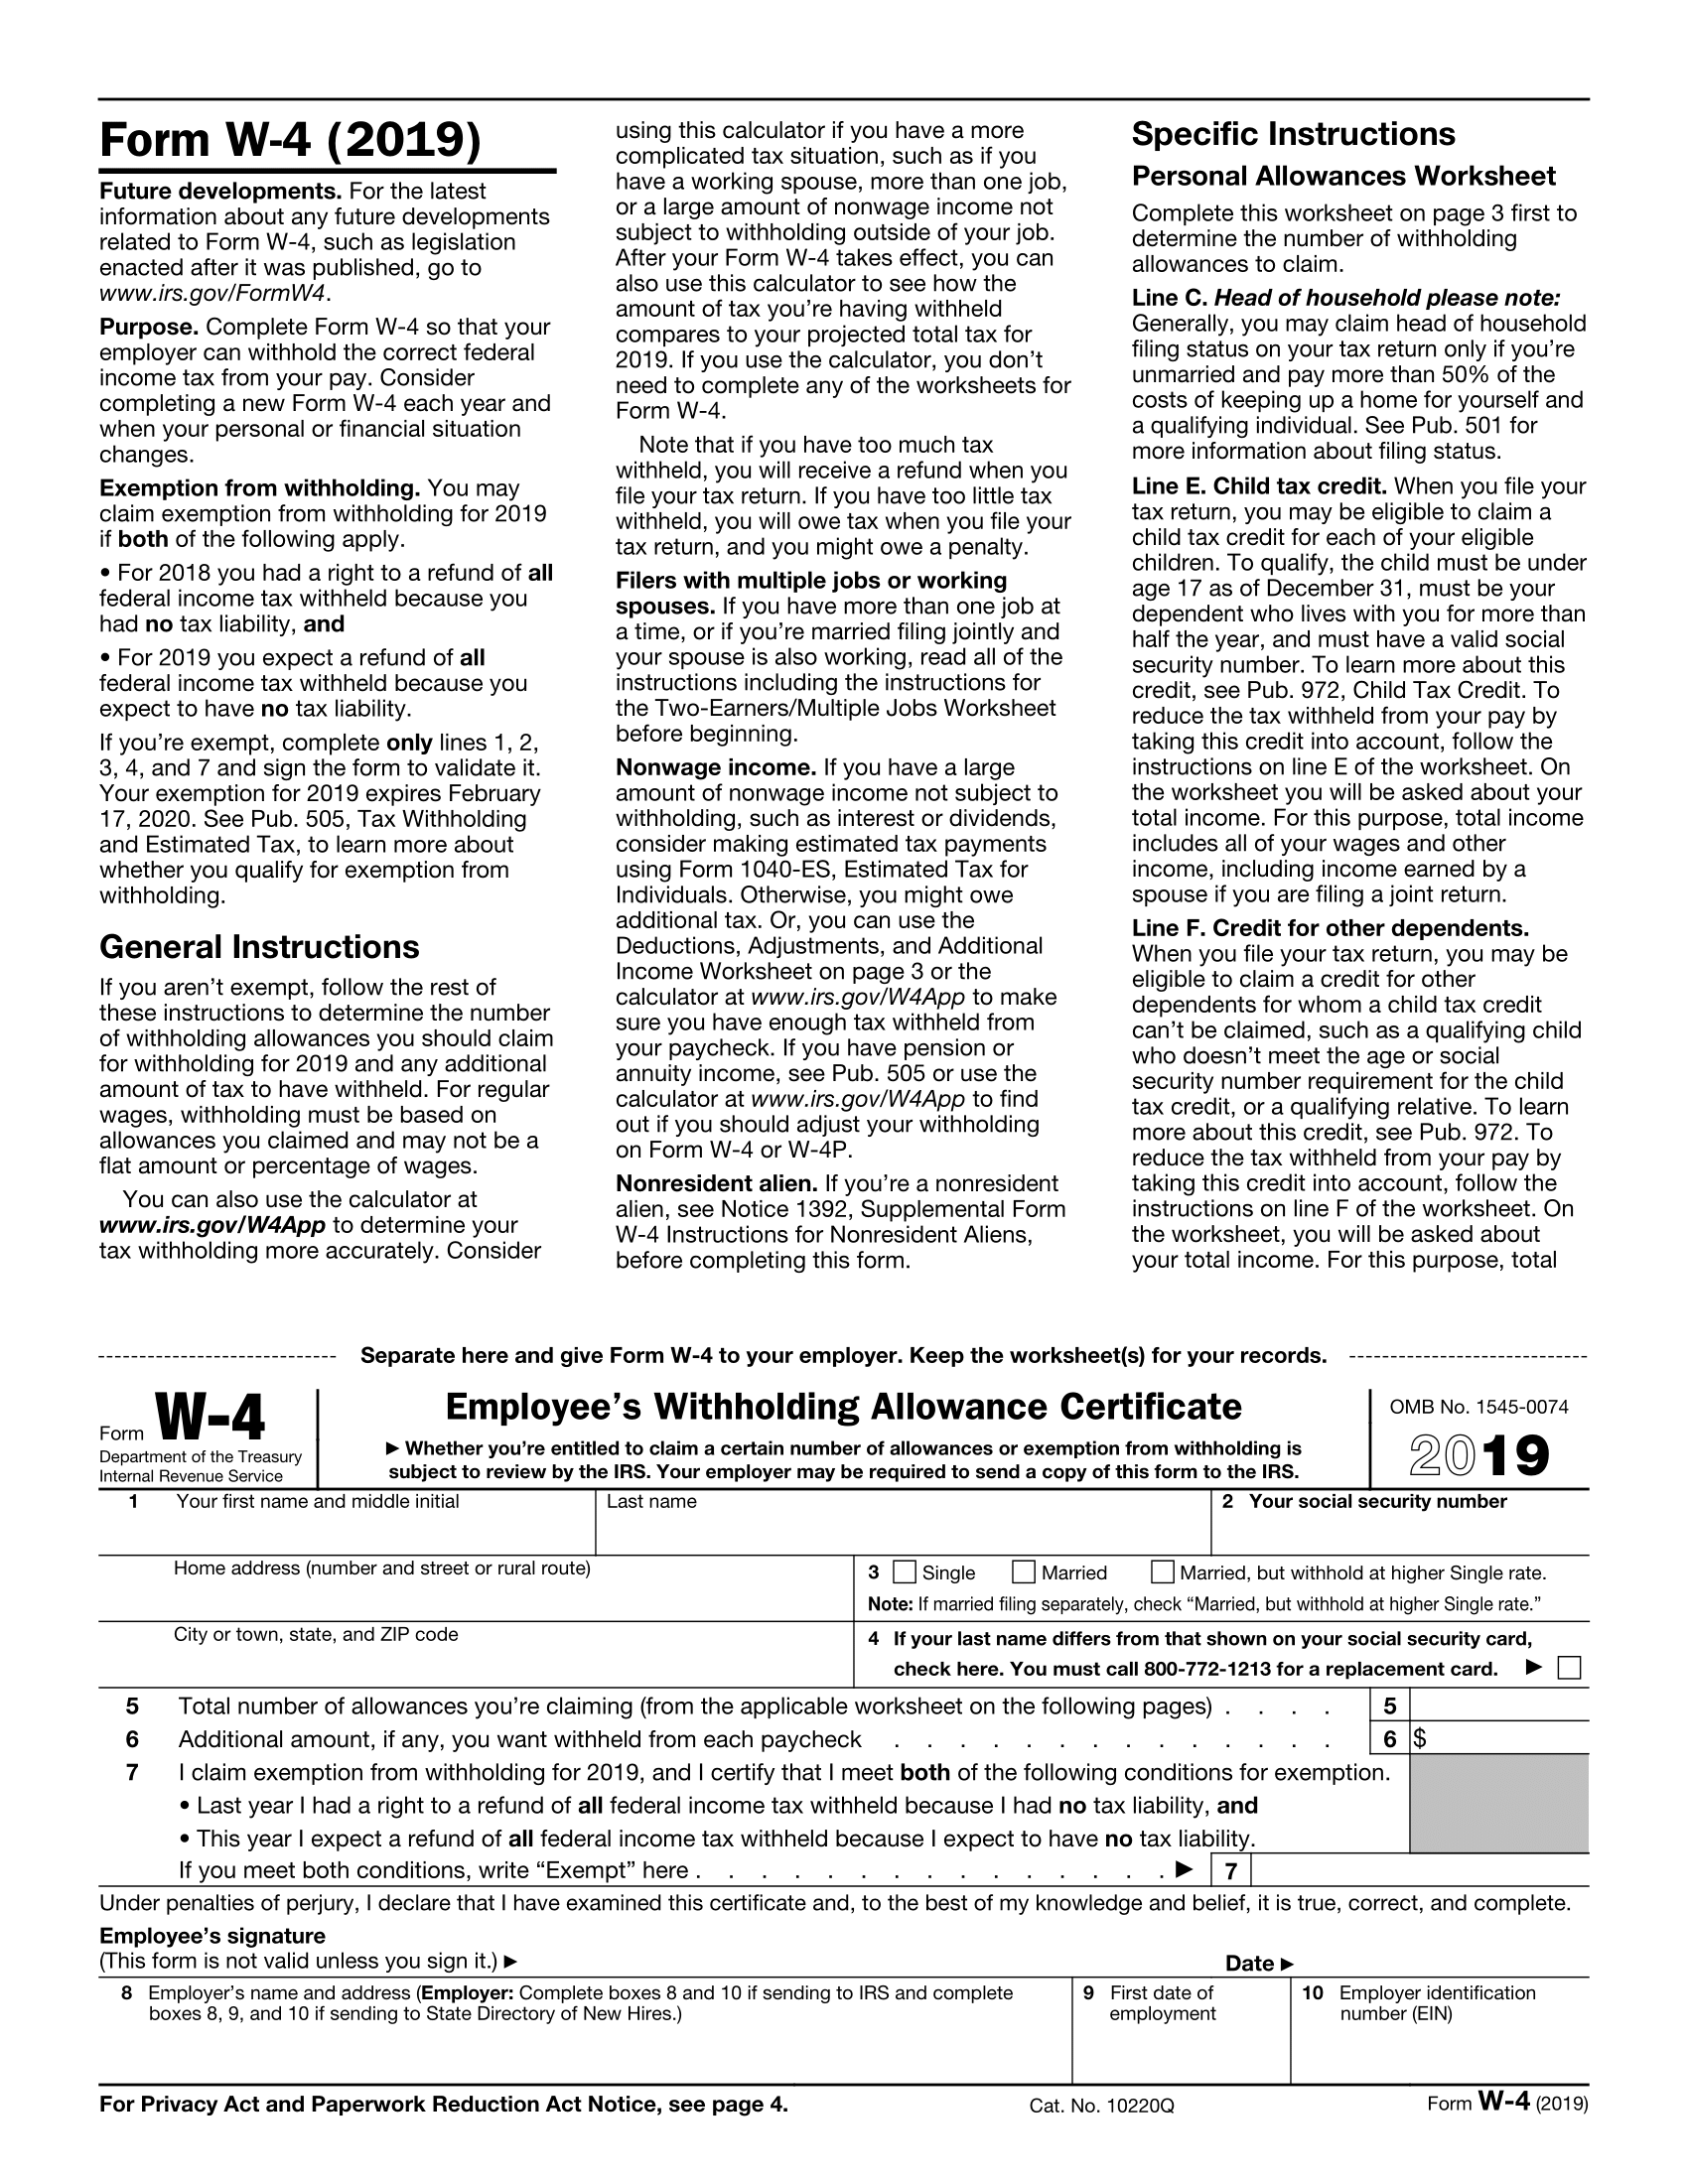 Form W-4 Page 1